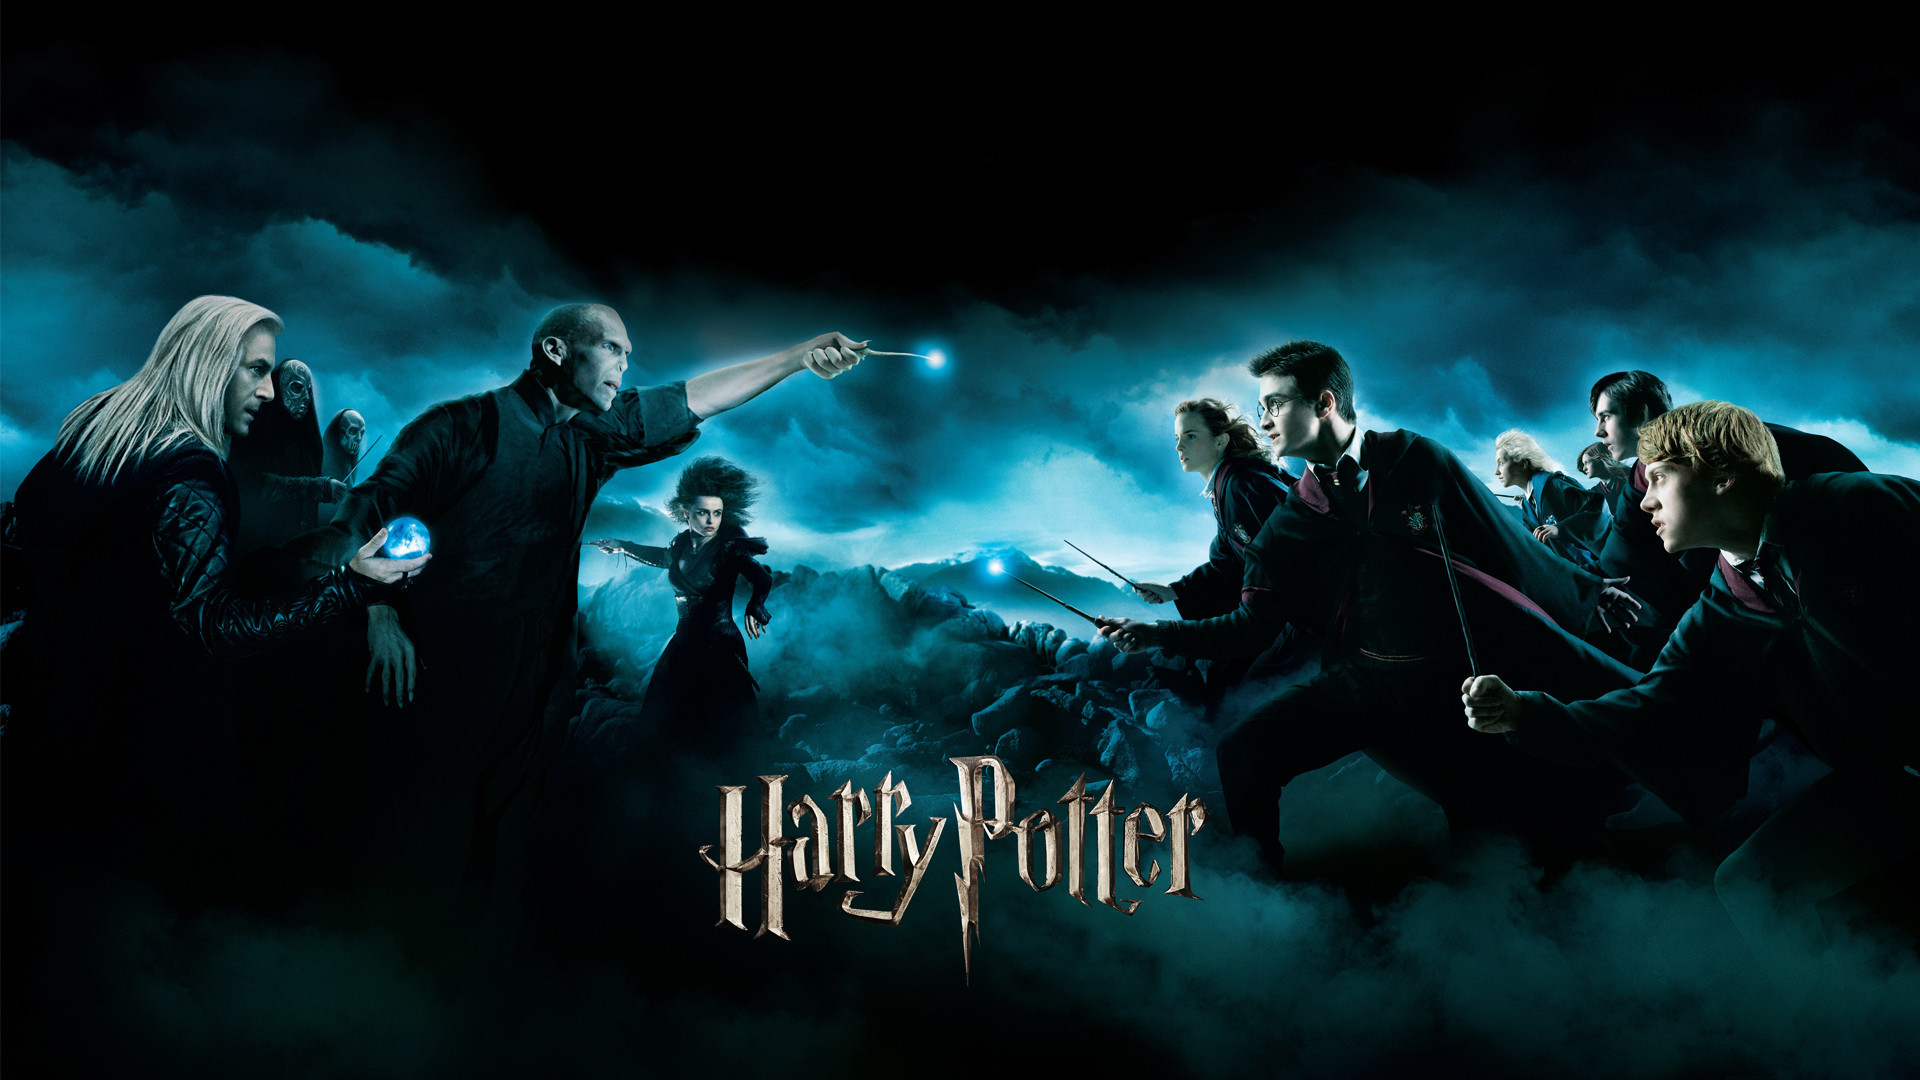 1920x1080 Harry Potter Ravenclaw Wallpaper New Wallpapers Harry Potter Group 79